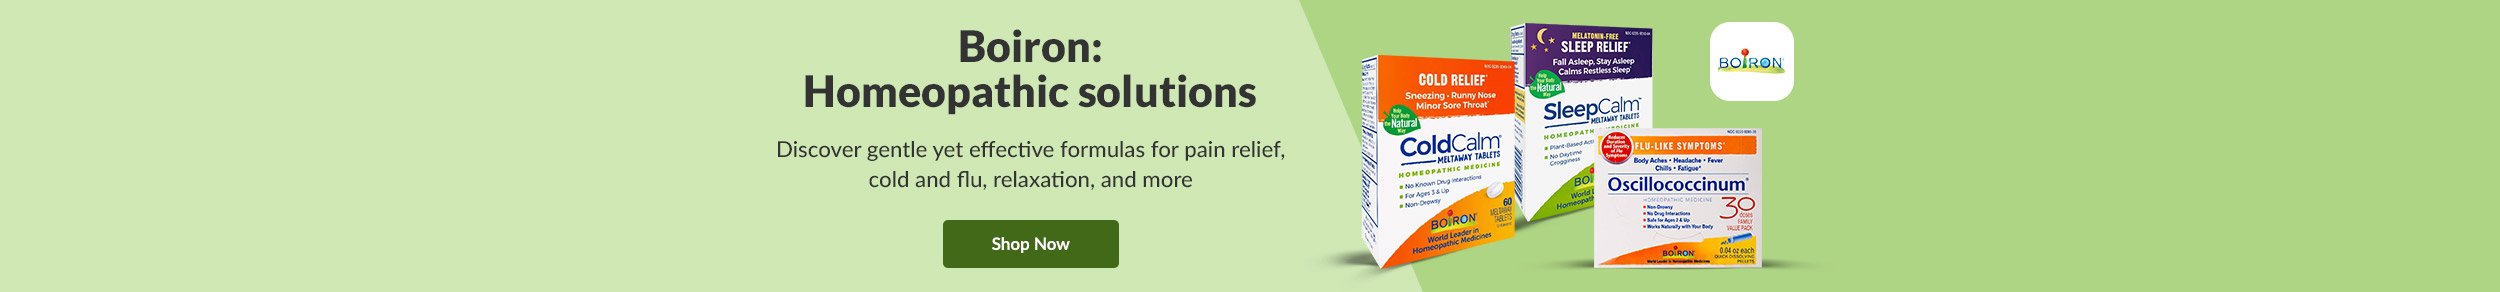 Boiron: Homeopathic solutions. Discover gentle yet effective formulas for pain relief, cold and flu, relaxation, and more. Shop Now!